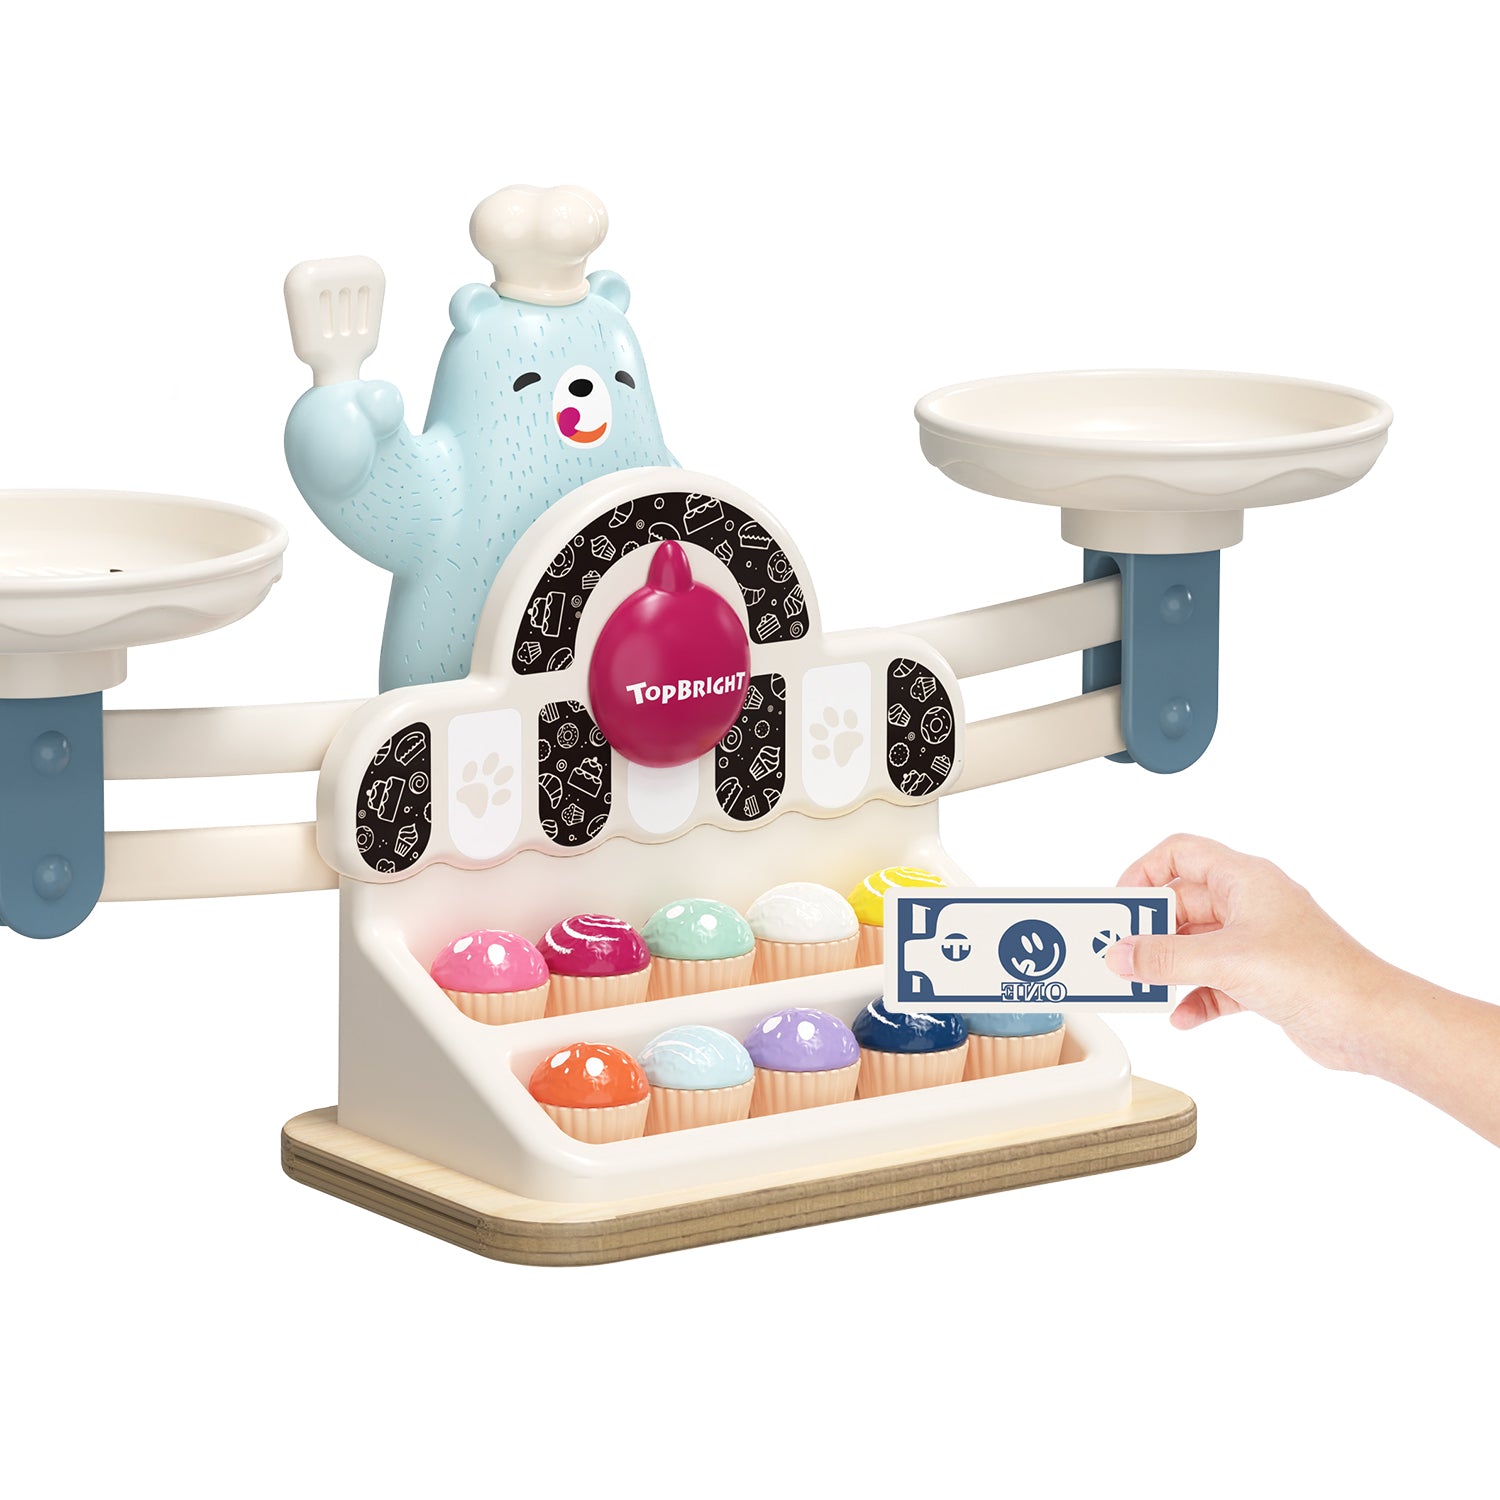 Ideal For Pretend Play: While playing, children become creative and make up exciting stories. Shopping games become even more realistic with the play money that is also included.